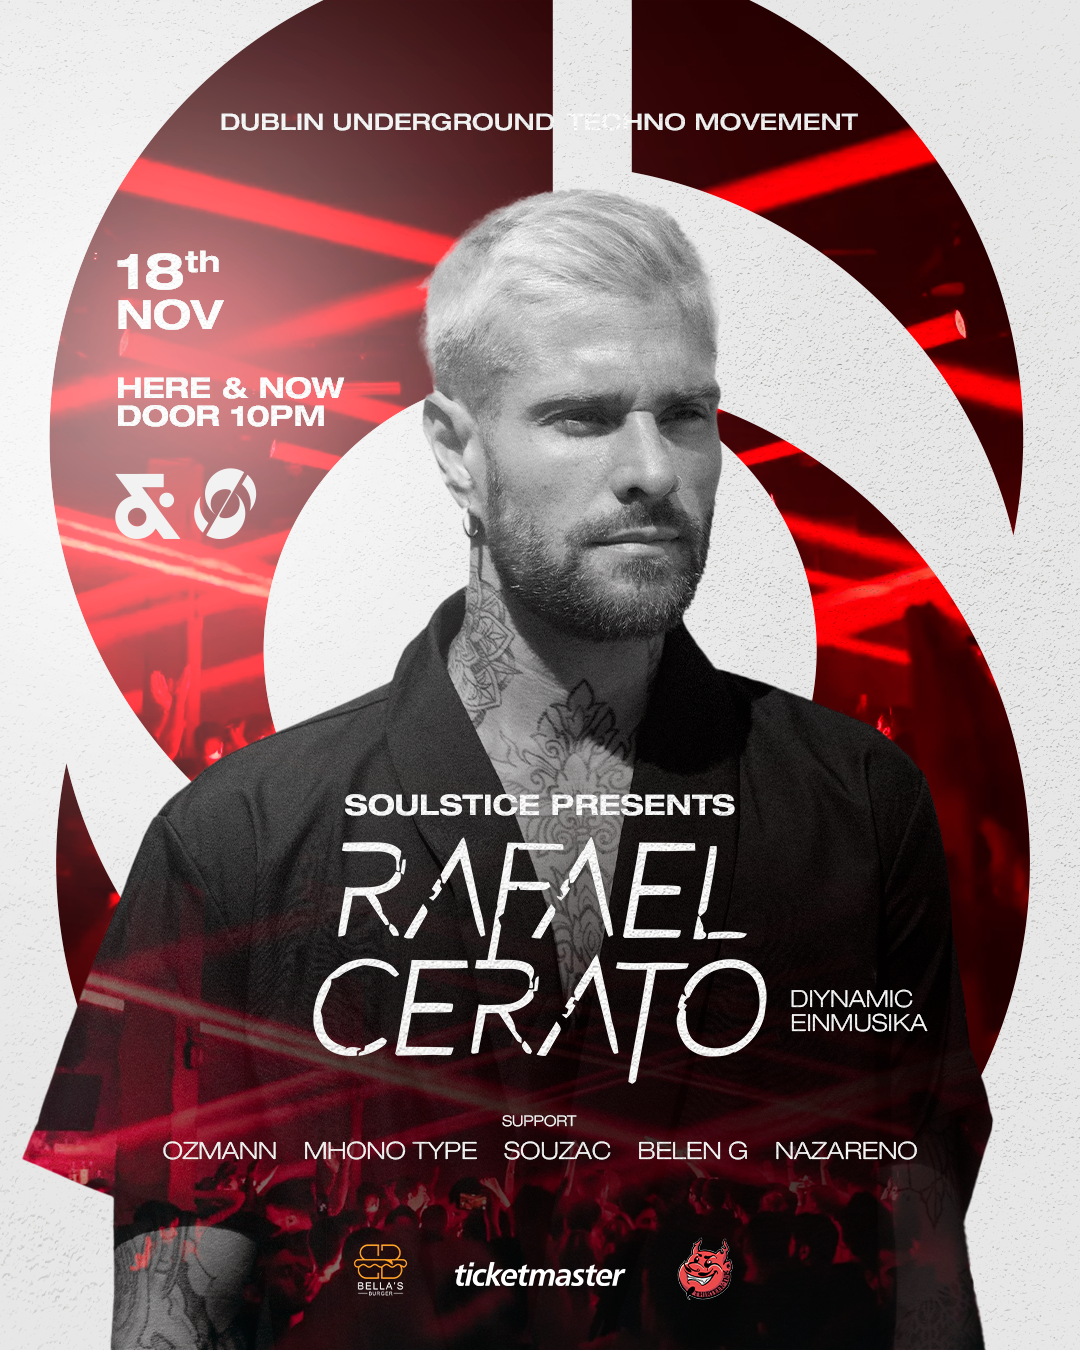 Soulstice presents: Rafael Cerato at Here & Now - Página frontal